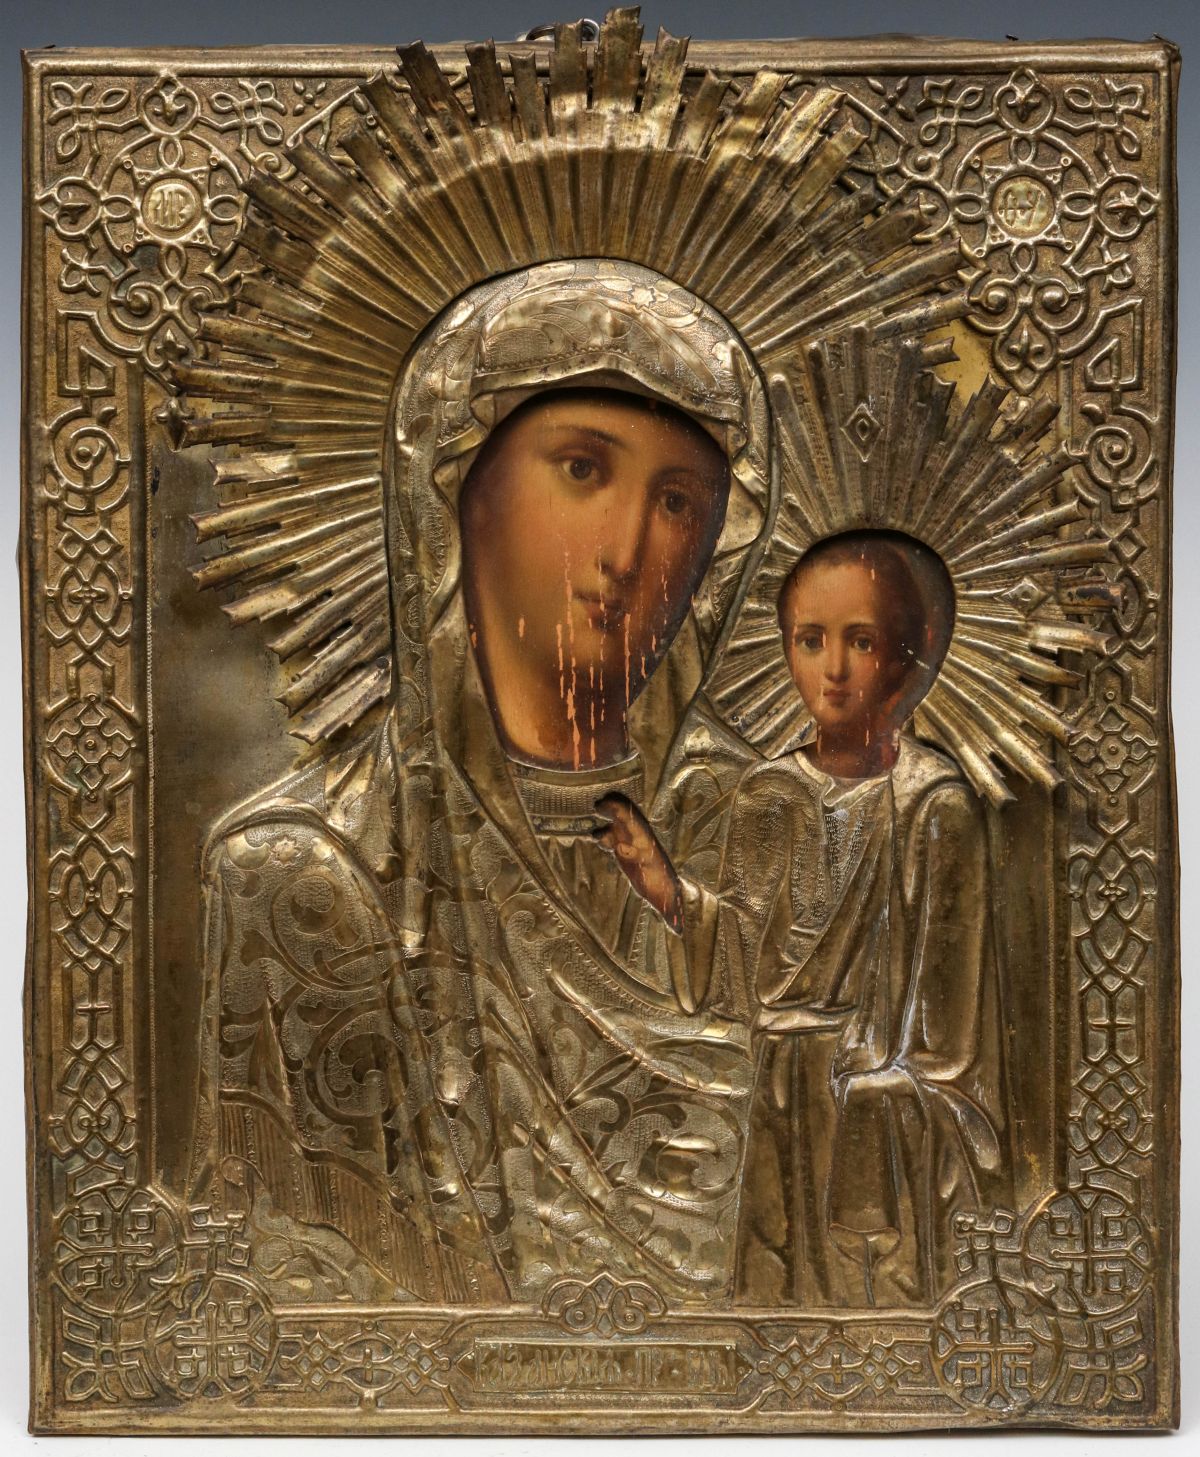 A LATE 19C RUSSIAN ICON OF THE KAZANSKAYA MOTHER OF GOD